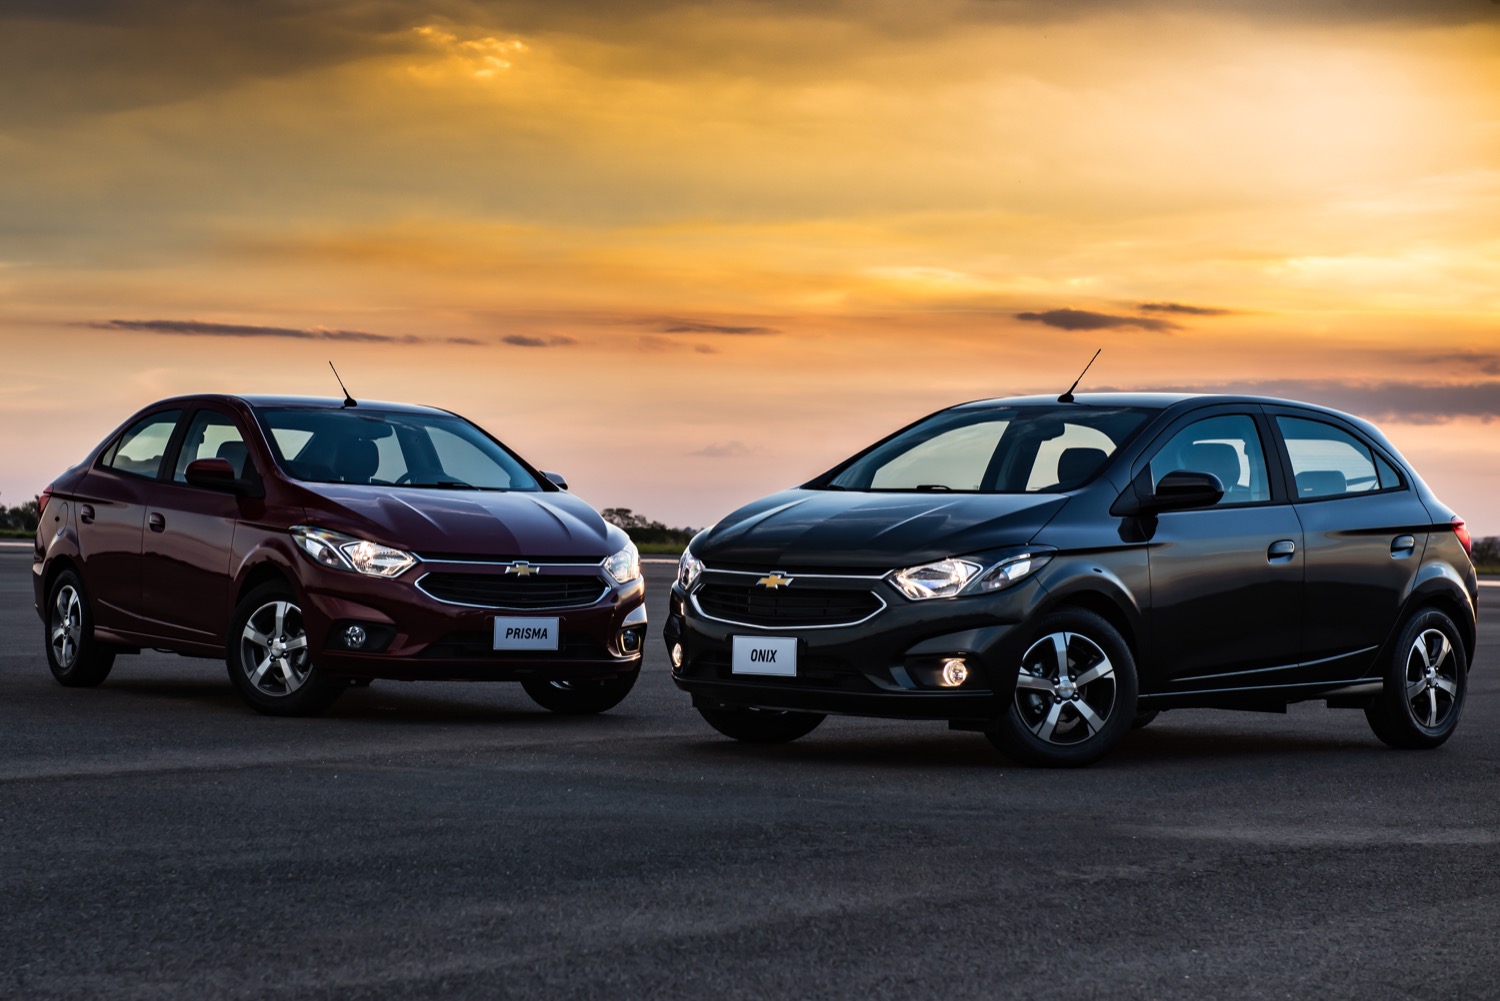 Chevy Onix Was Brazil's Best-Selling Car In November 2017